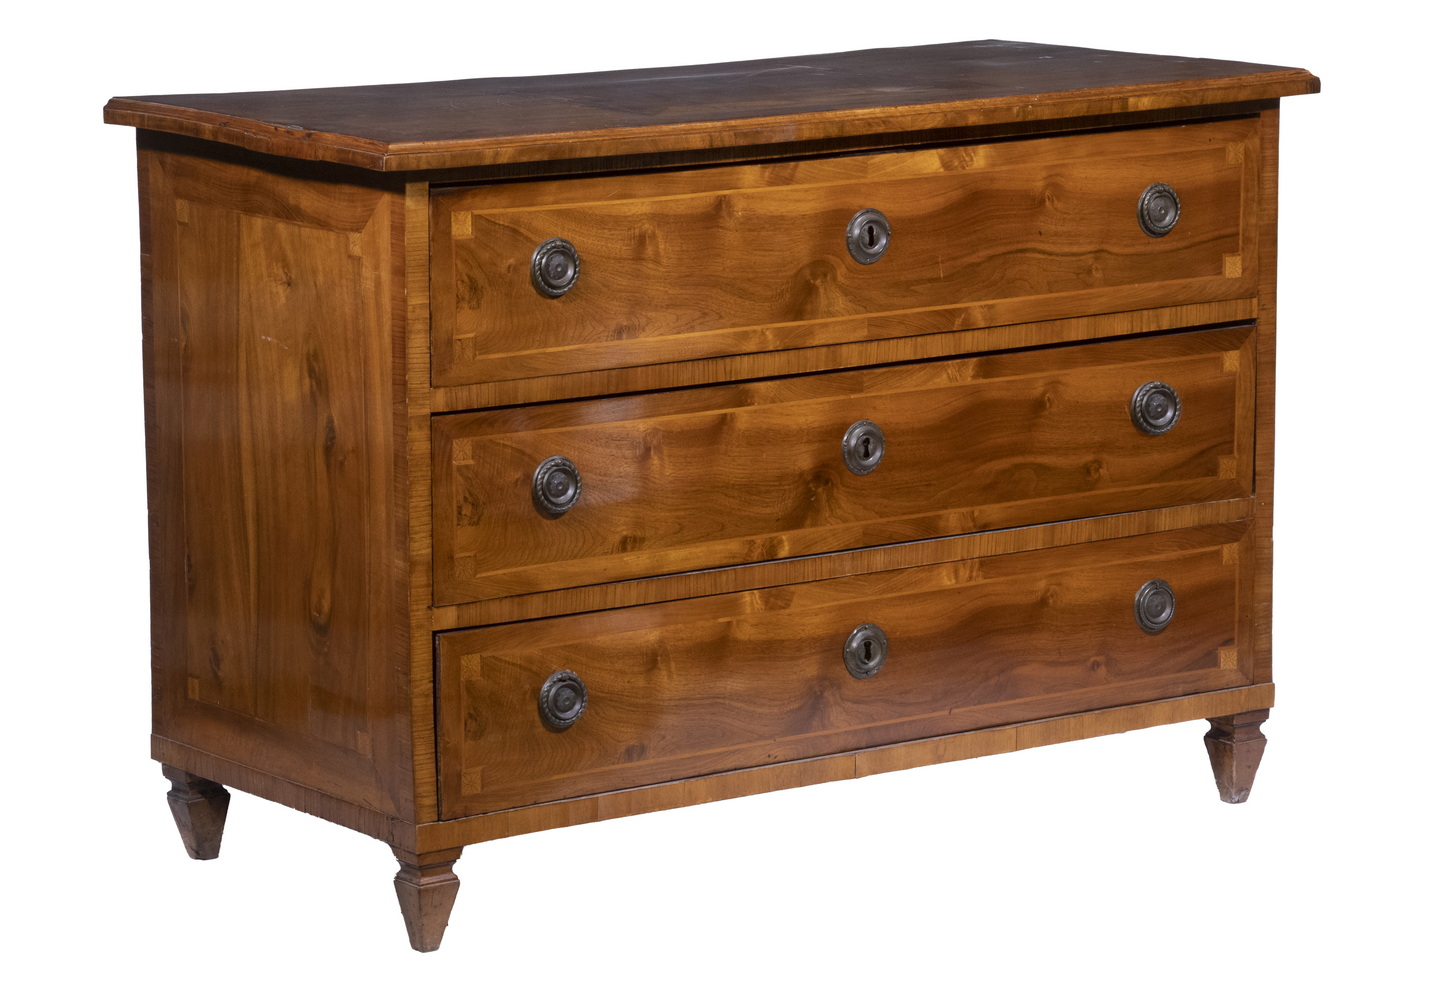 ITALIAN NEOCLASSICAL INLAID CHEST 302a9d